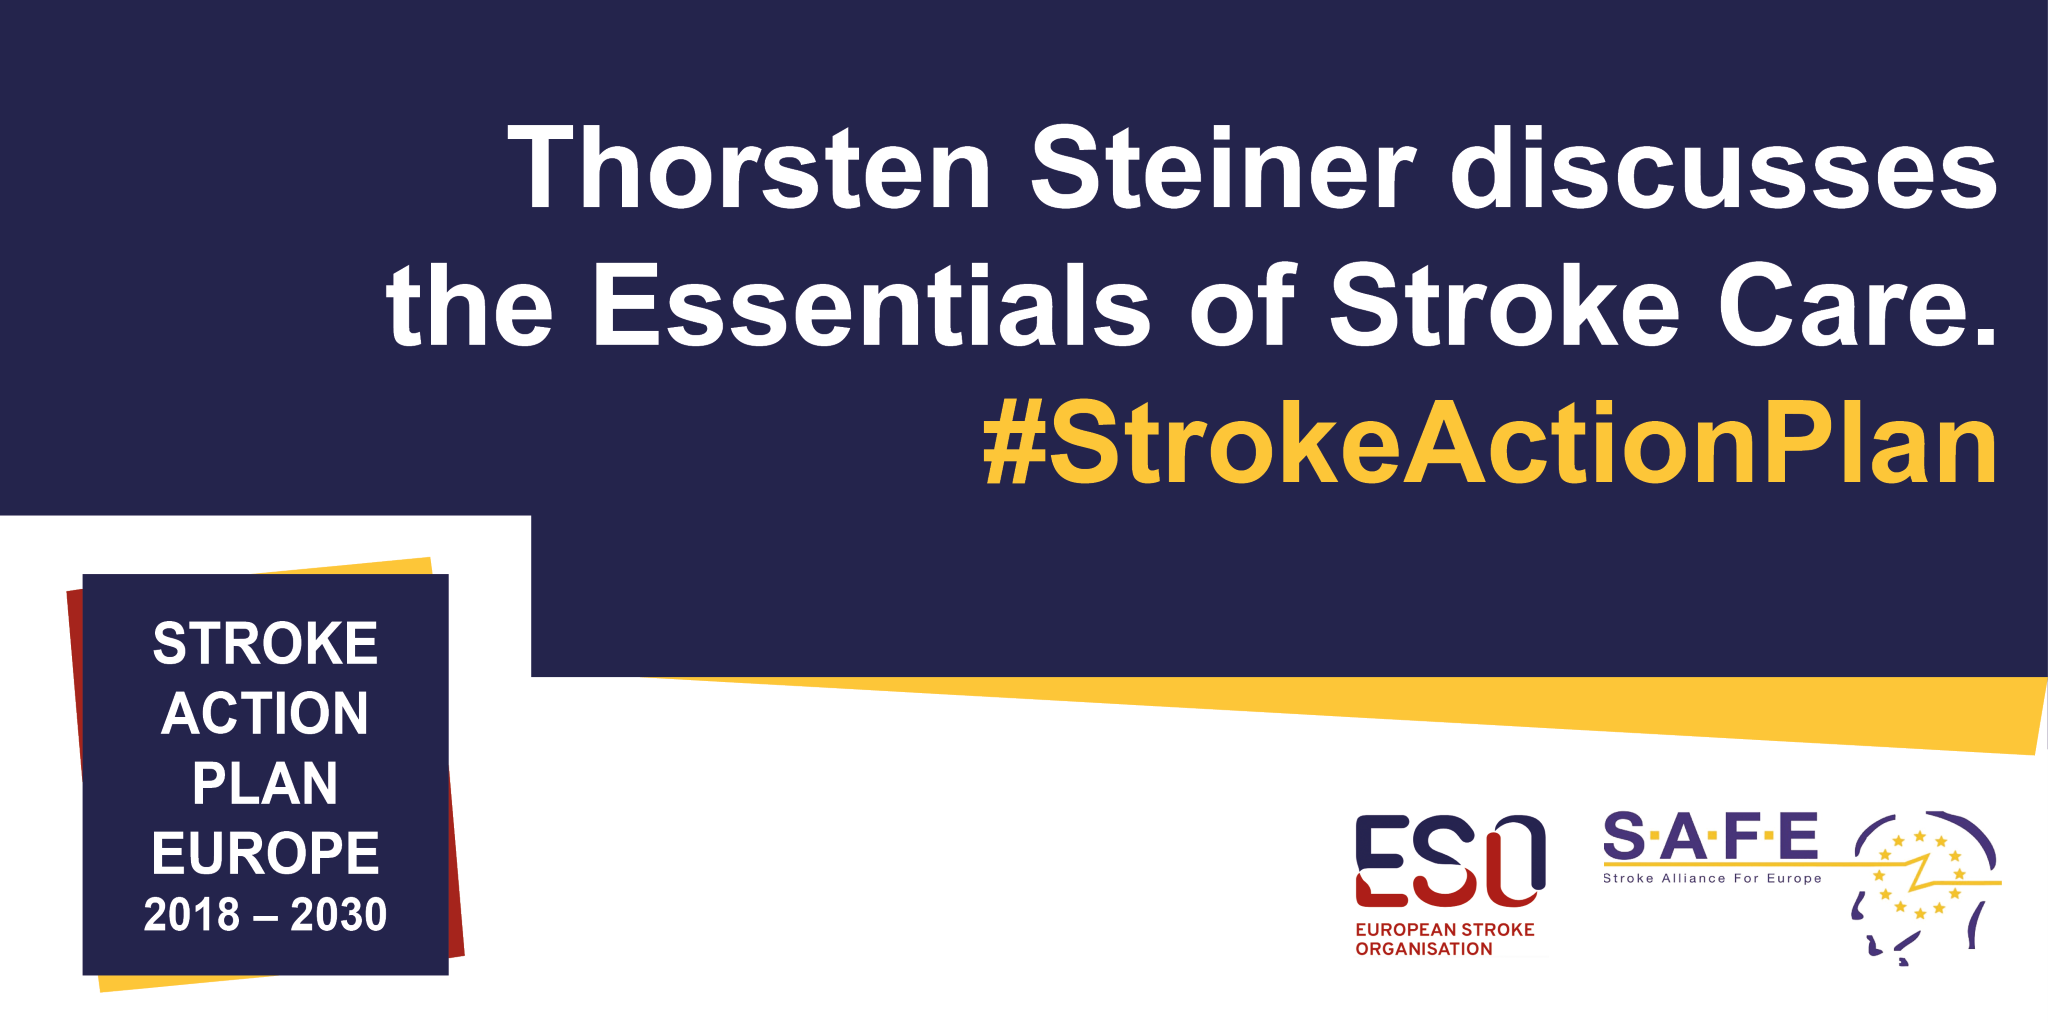 Essentials of Stroke Care Guide available to help improve stroke care